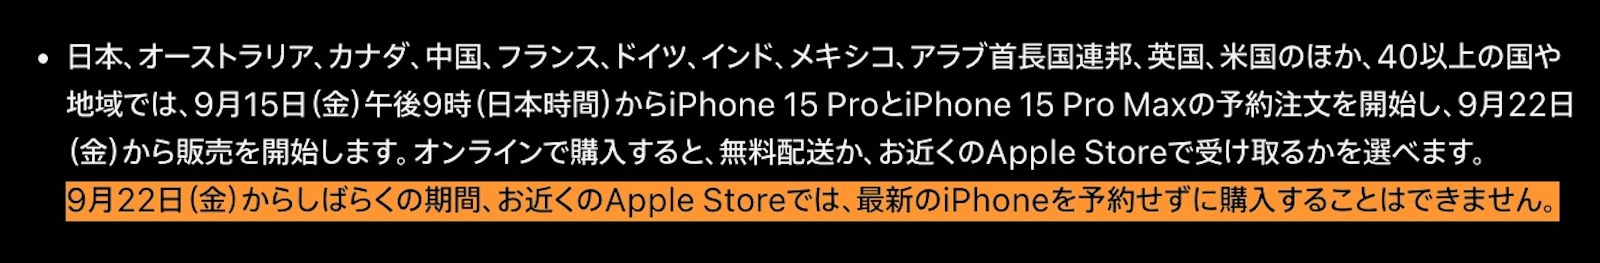 reservation-needed-to-buy-iphone15.jpg